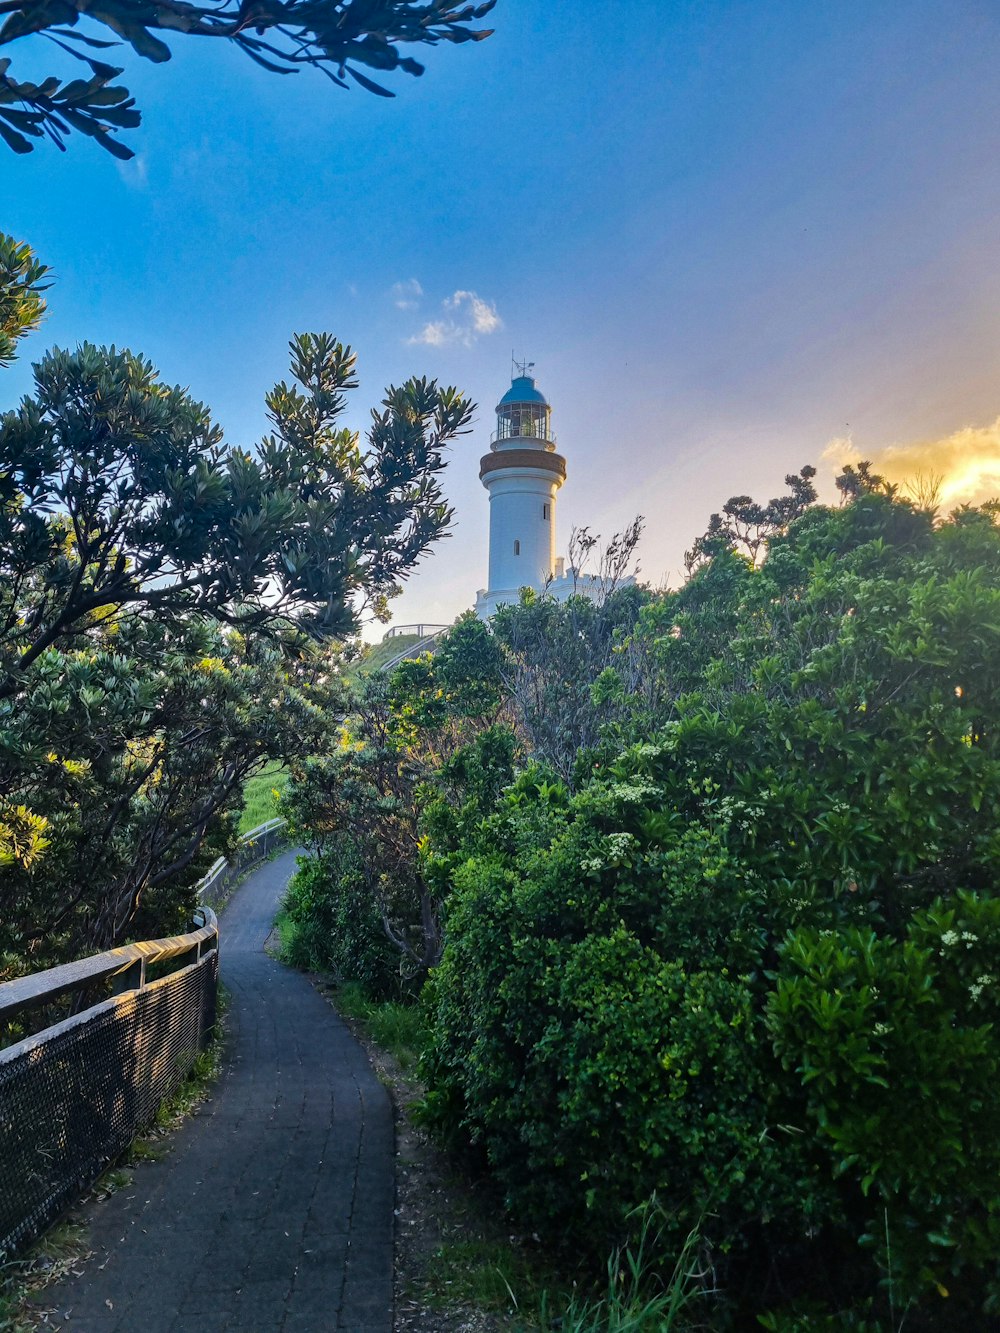 a path leading to a light house surrounded by trees